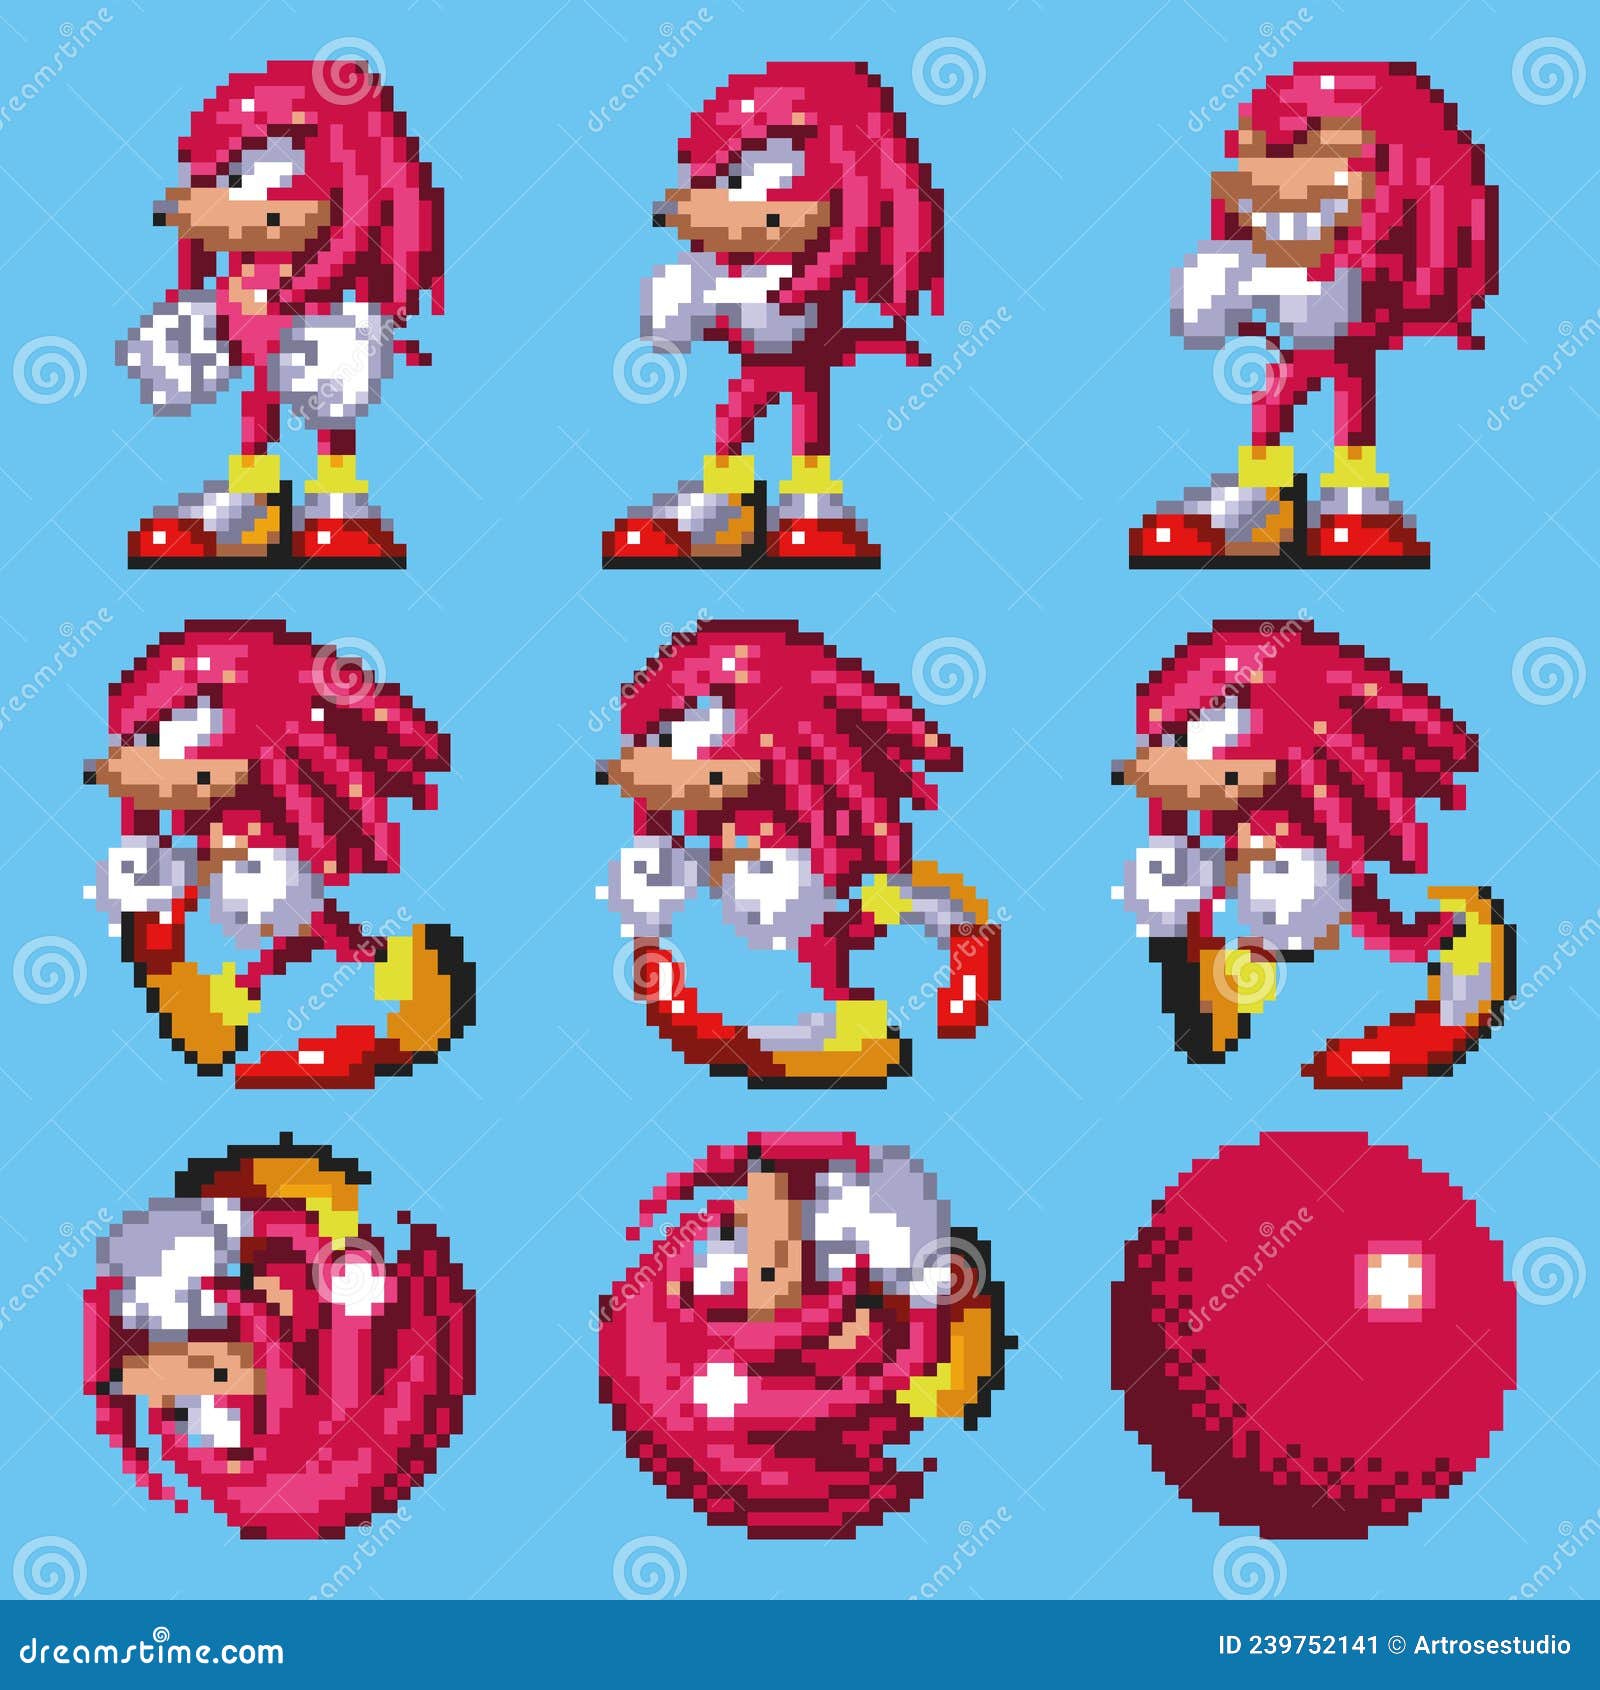 Set Of Knuckles Moves, Art Of Sonic The Hedgehog 3 Classic Video Game,  Pixel Design Vector Illustration Editorial Photo - Illustration Of Move,  Hedgehog: 239752141